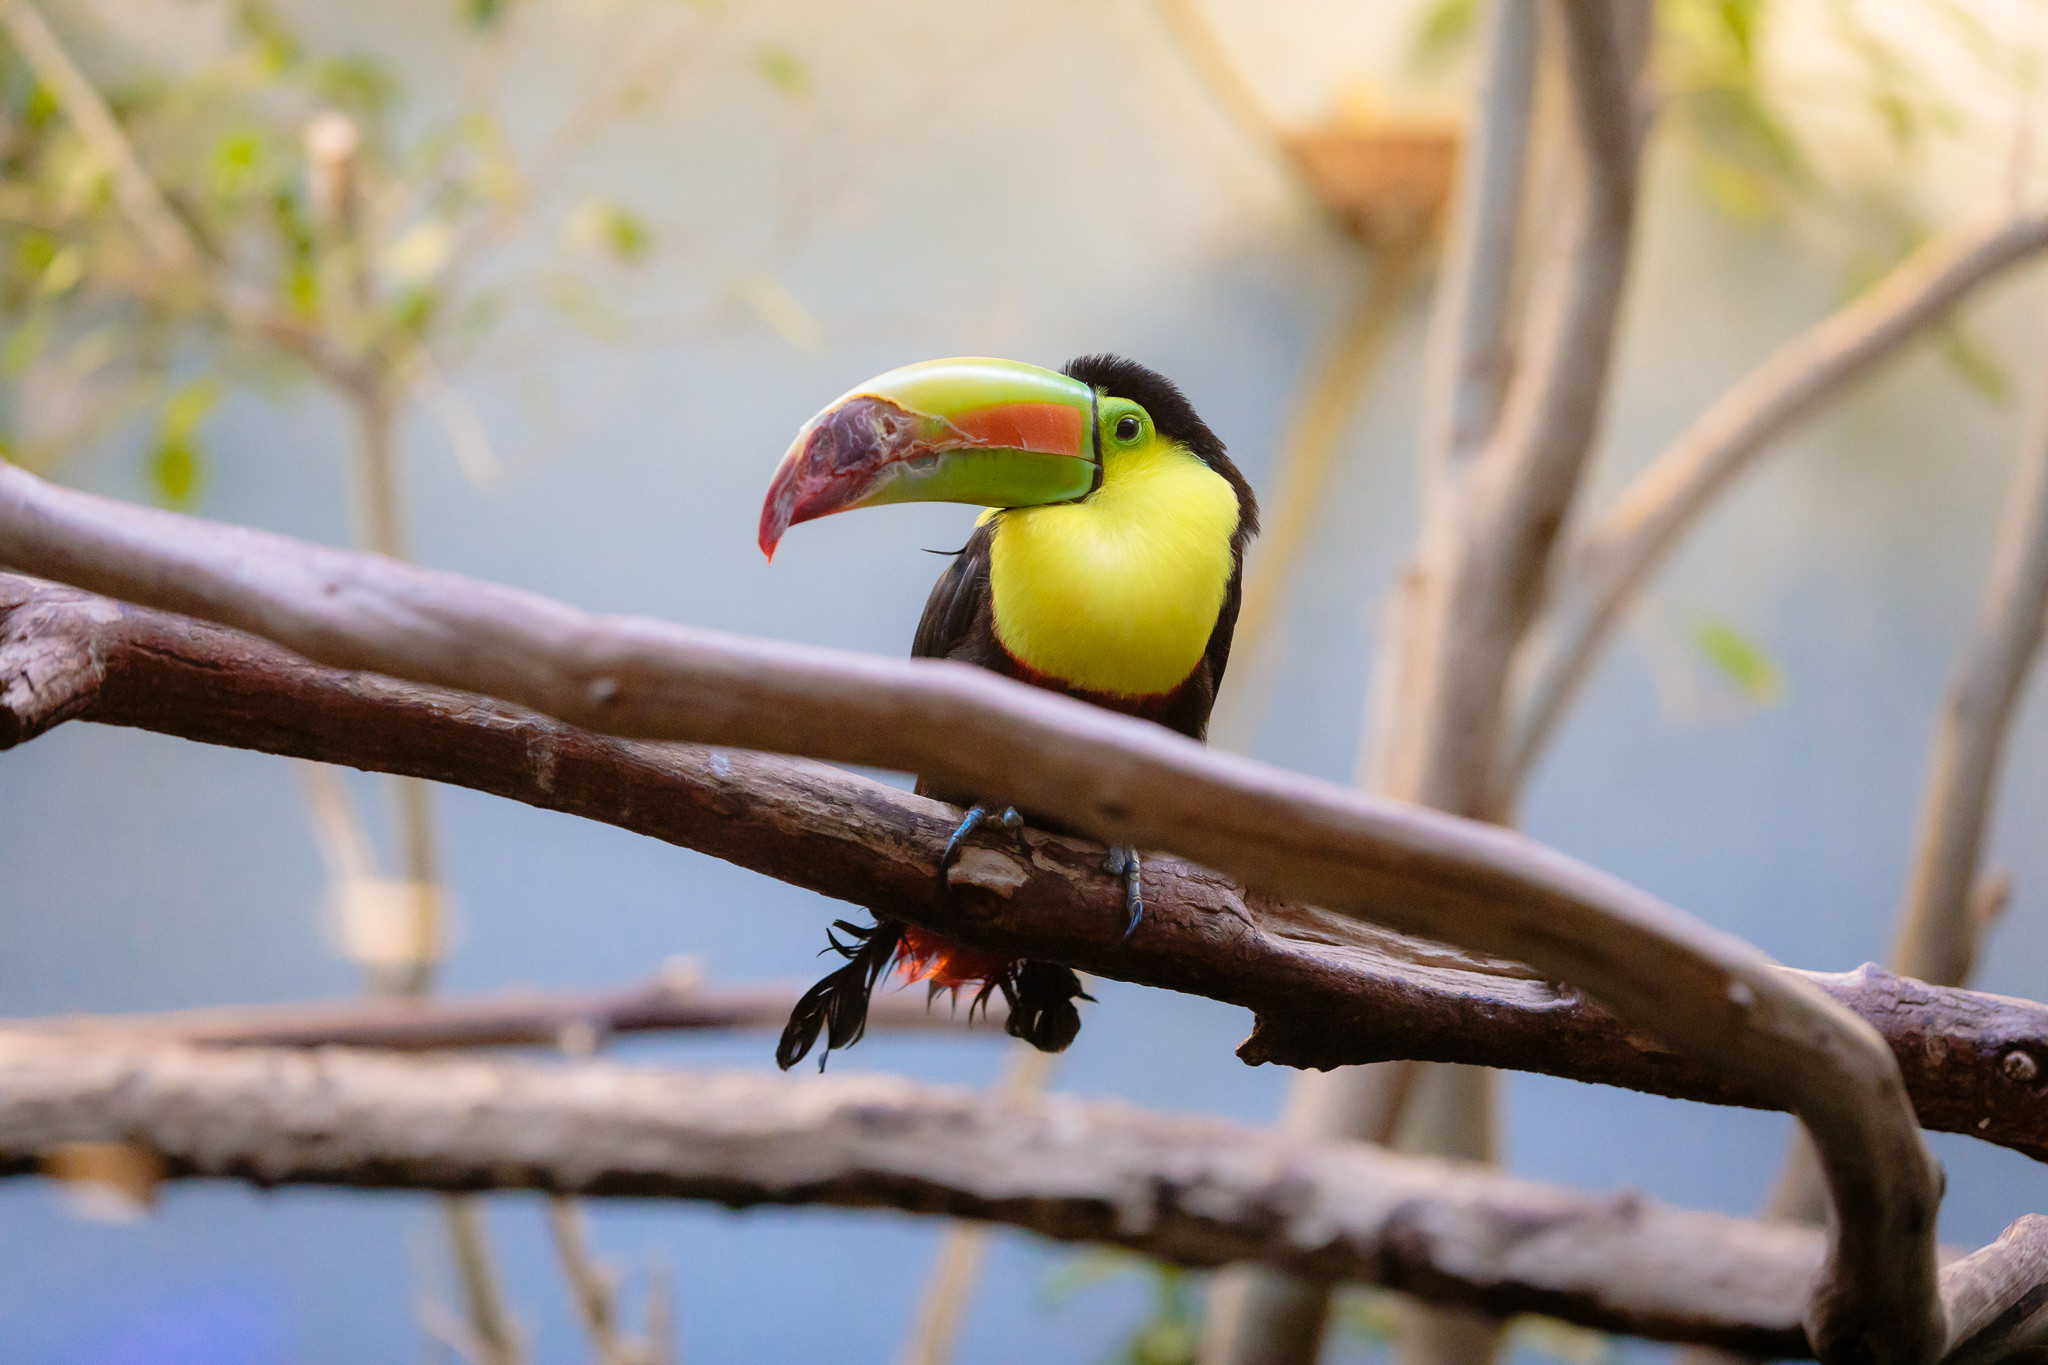 Keel-billed toucan at the National Aviary in Pittsburgh, PA